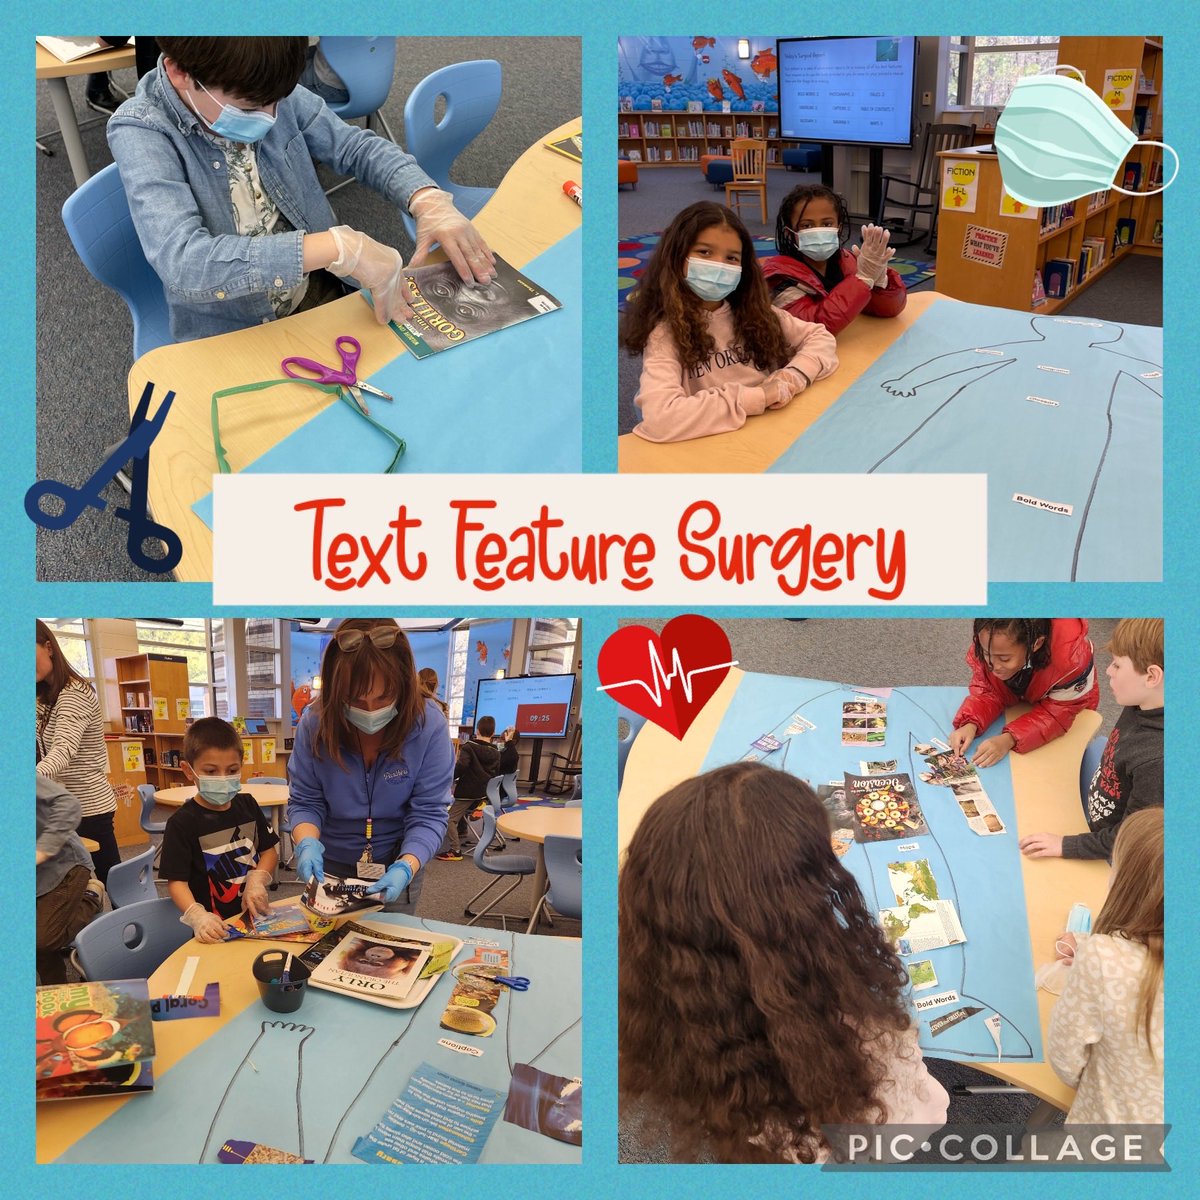 It was a busy day in the operation room for these second grade surgeons. They found all the text features that their patients needed to be saved! Thanks to all the extra nurses that helped out ⁦@pmesvb⁩ #vblms ⁦@Tajkirsch⁩ ⁦@ITS_LPate⁩